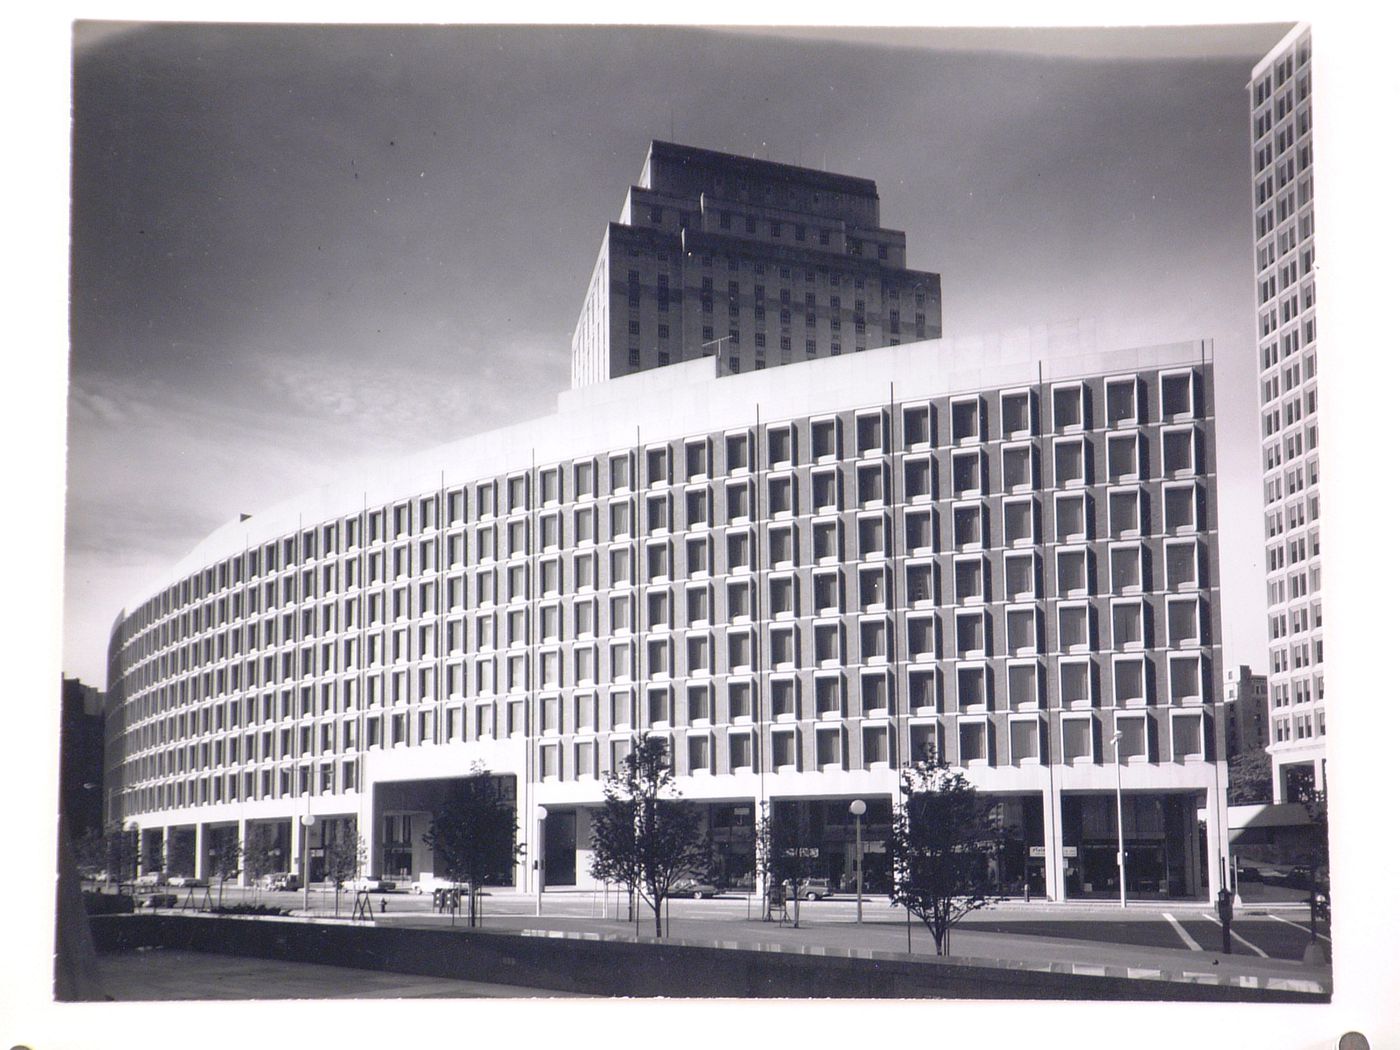 General view of the façade of the Center Plaza Building, Boston, Massachusetts, United States